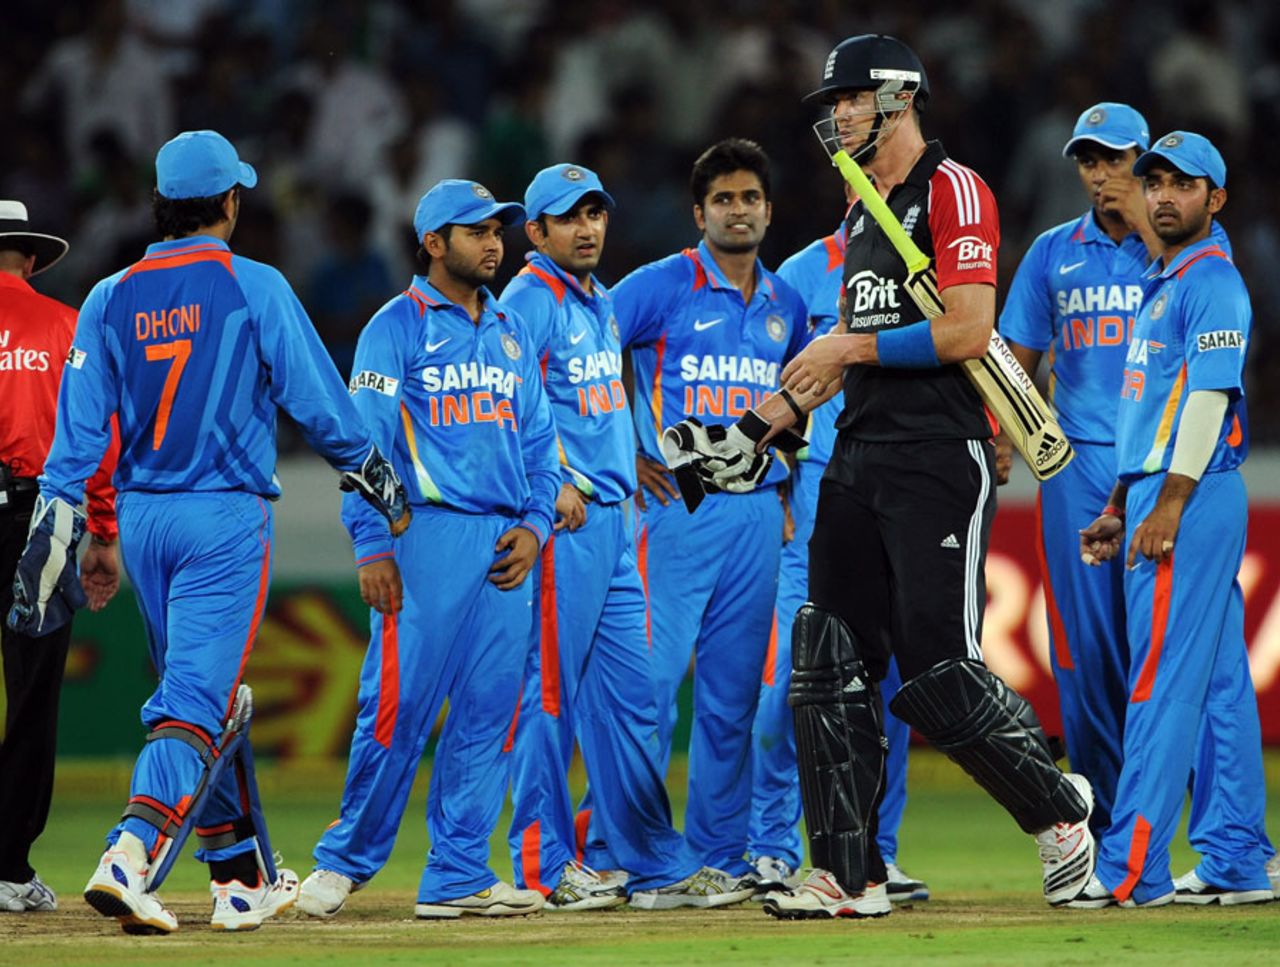 Kevin Pietersen trudges off after being run out by R Ashwin, India v England, 1st ODI, Hyderabad, October 14, 2011